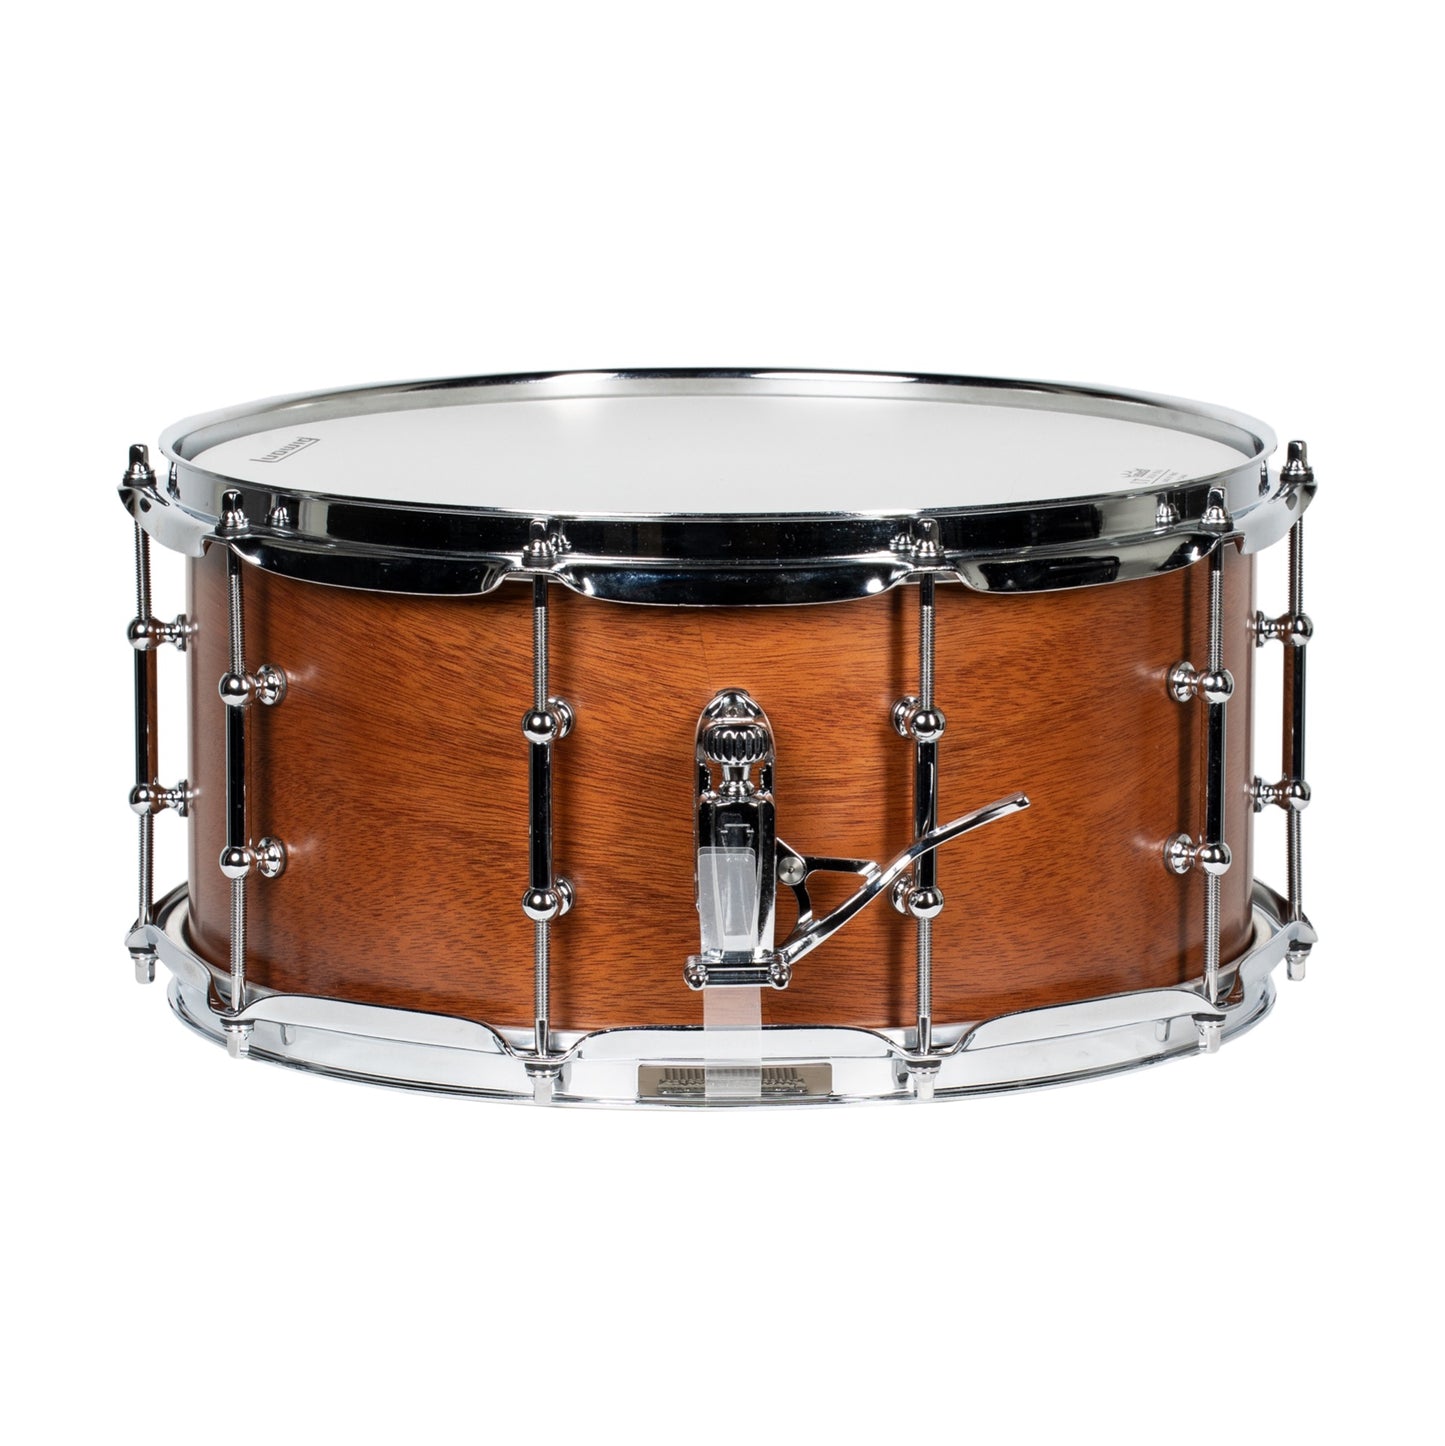 Ludwig Universal Series 6.5x14 Snare Drum, Mahogany with Chrome Hardware